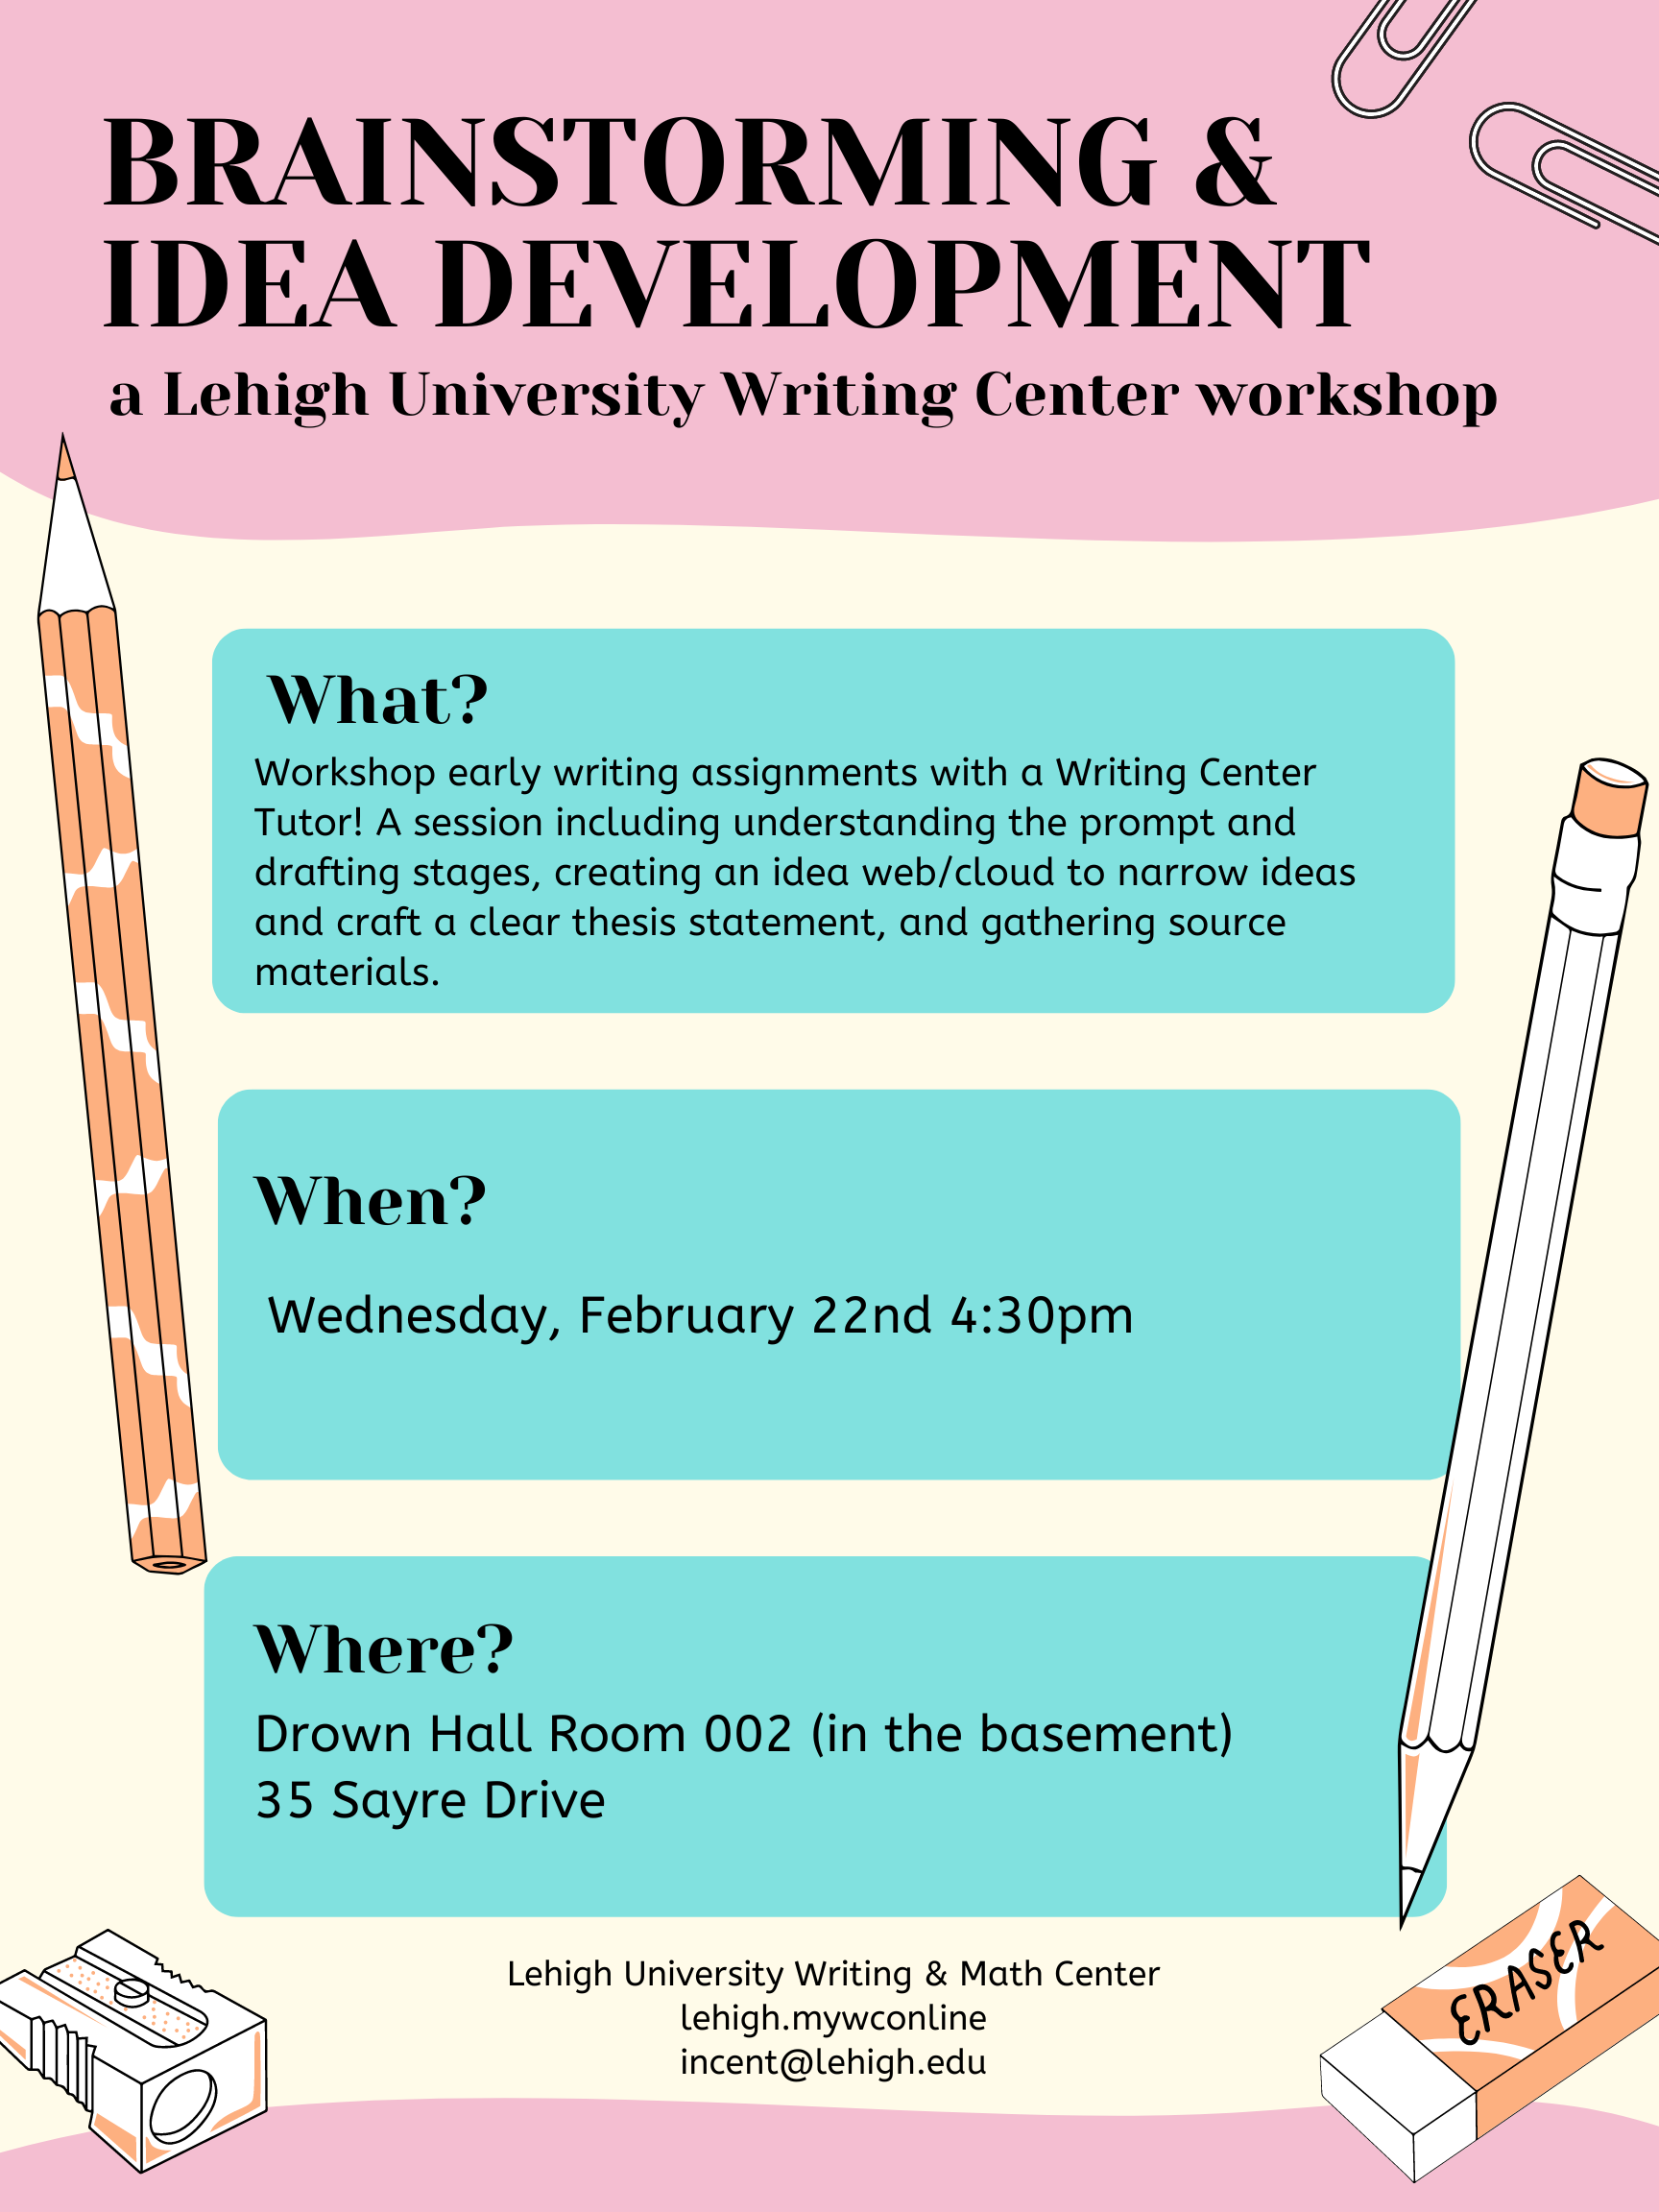 Flyer with event details on a pink and blue background with writing utensil images.